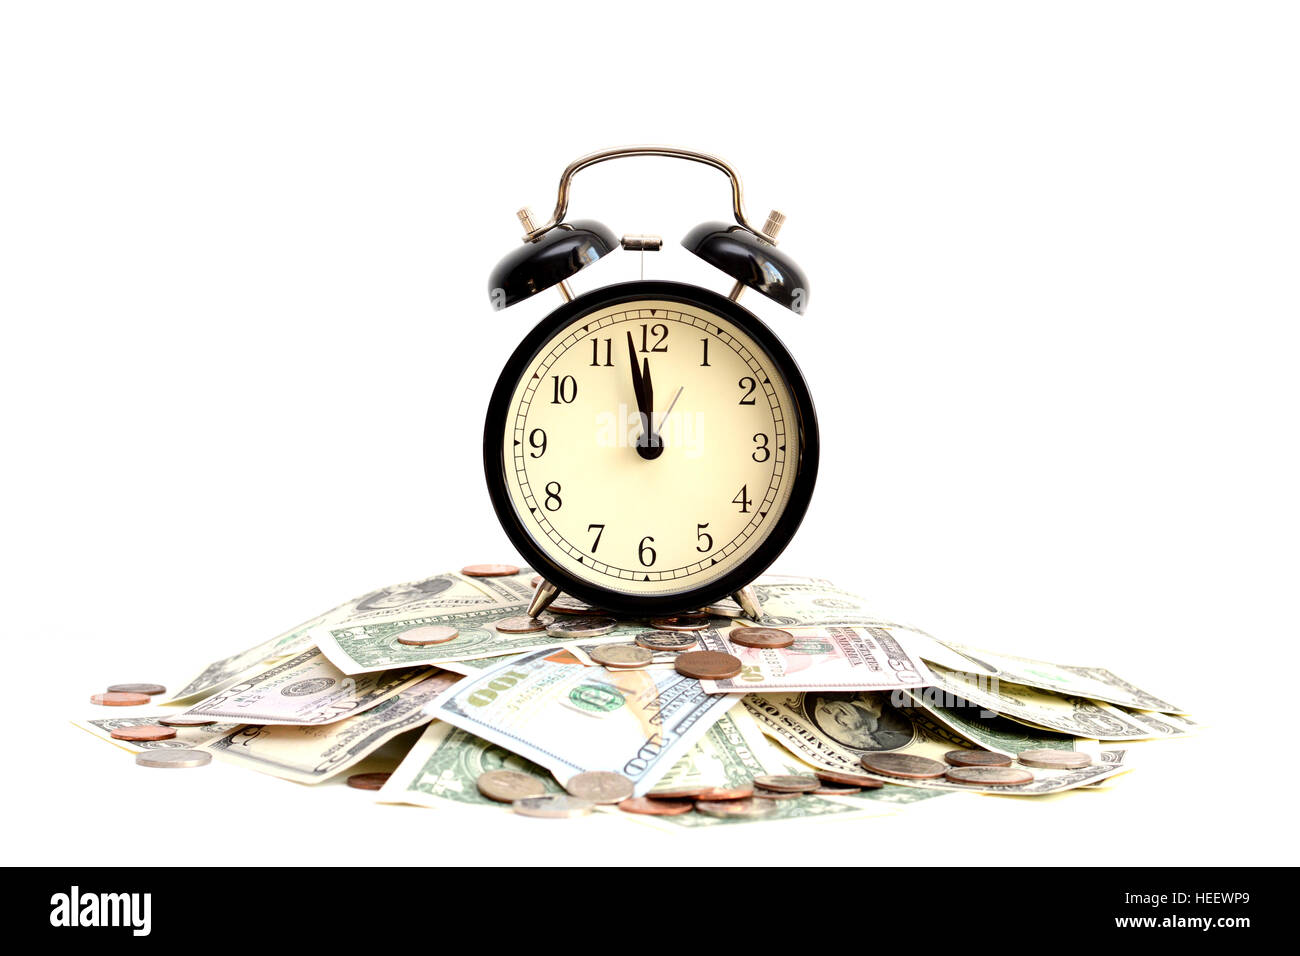 Time is money concept with close up of an old clock on dollar bills Stock Photo